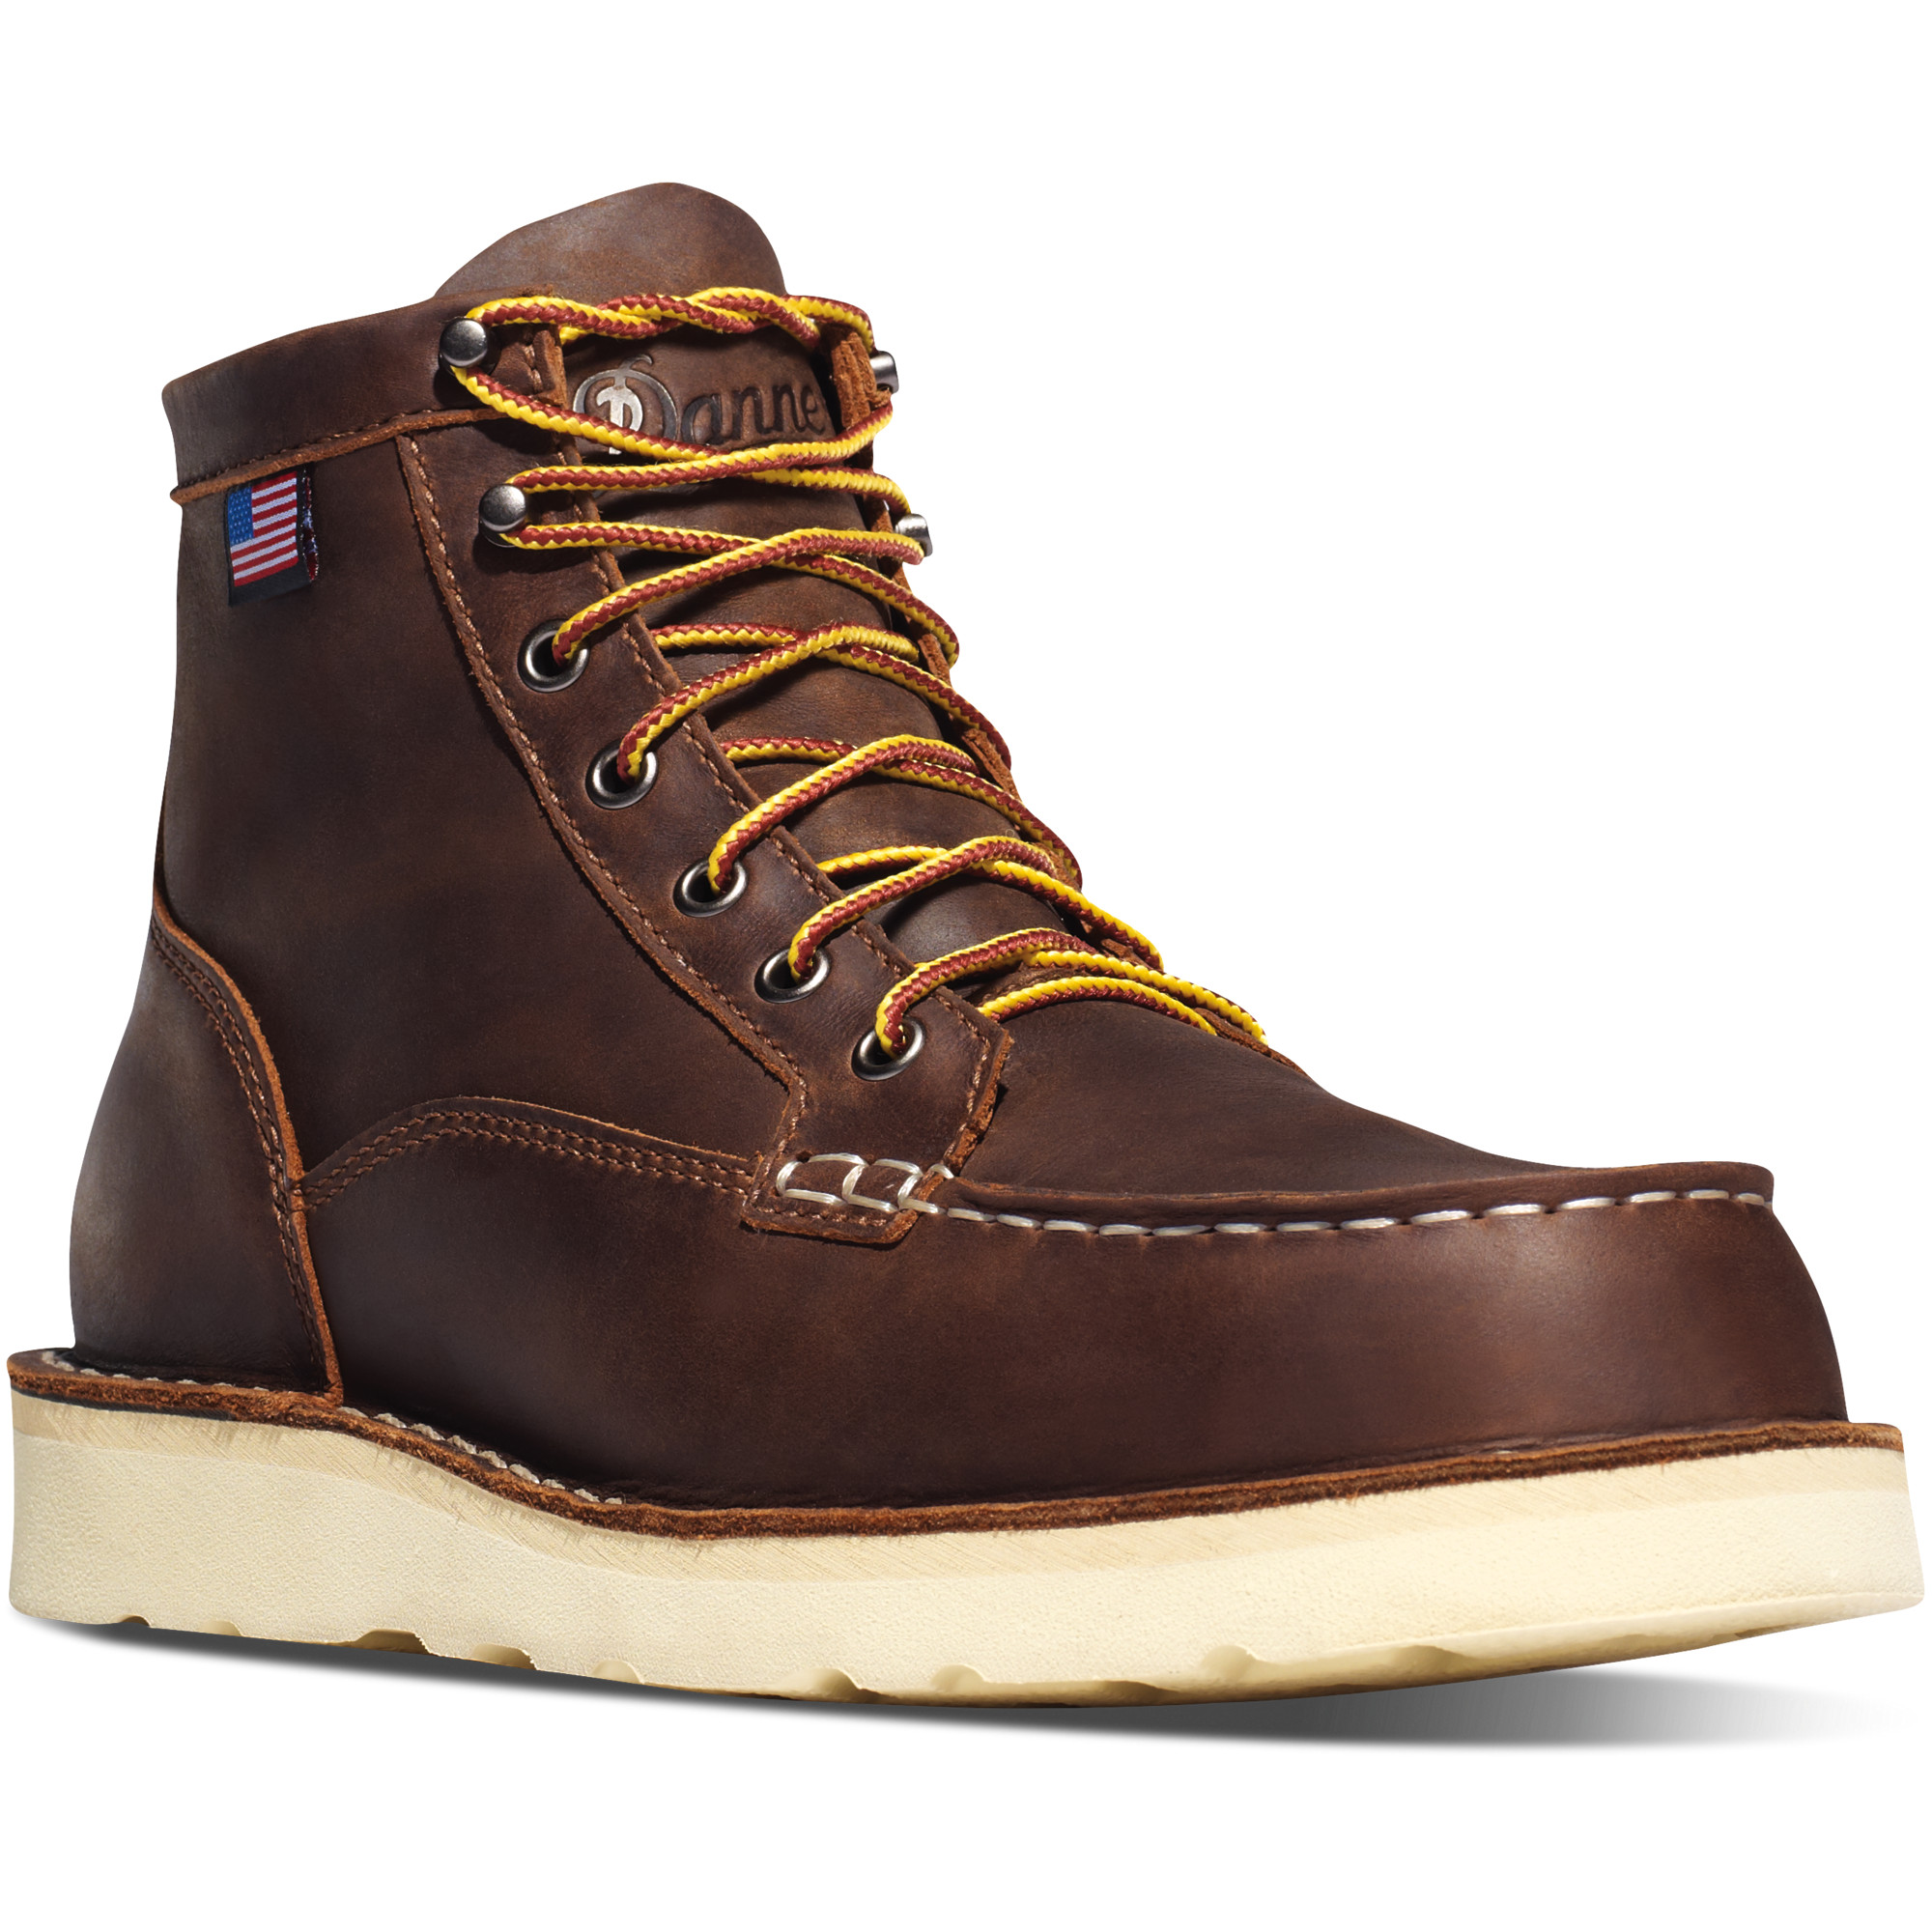 Danner Bull Run Moc Toe Boots from GME Supply